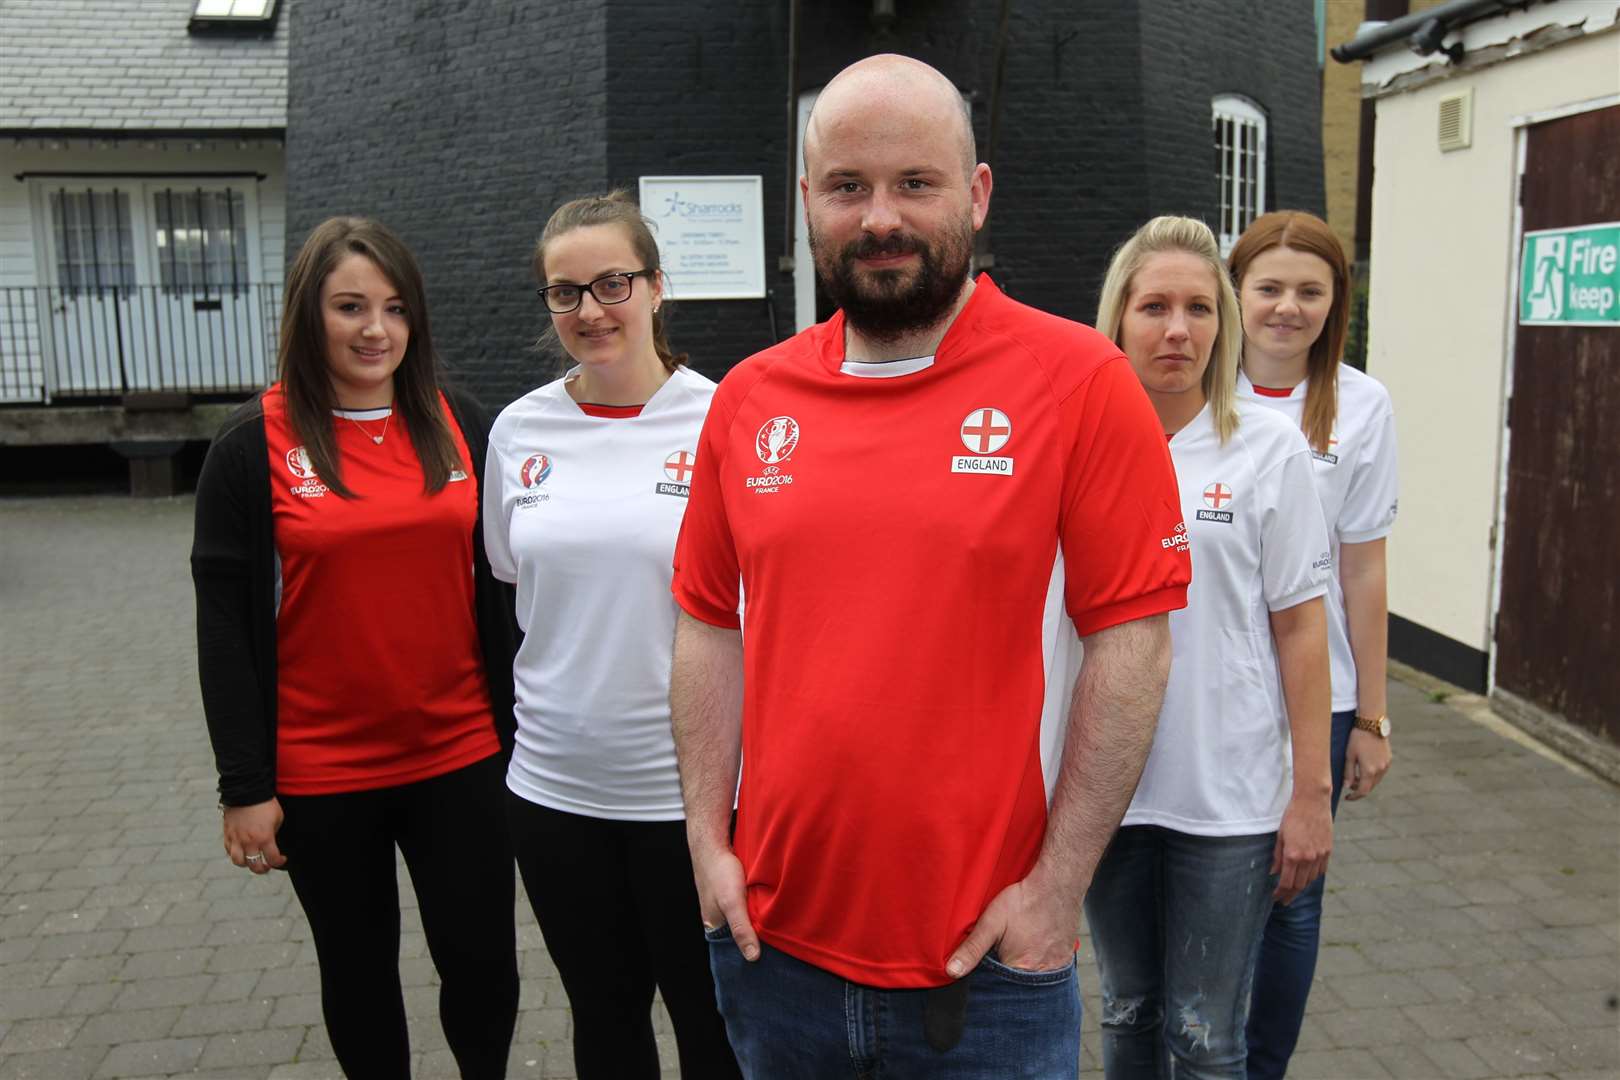 Working from home: Alan Doucy and the staff of Sharrocks. The insurance company has closed its office in Sheerness High Street. Stock photo when the team was kitted out in England kit. Picture: John Westhrop